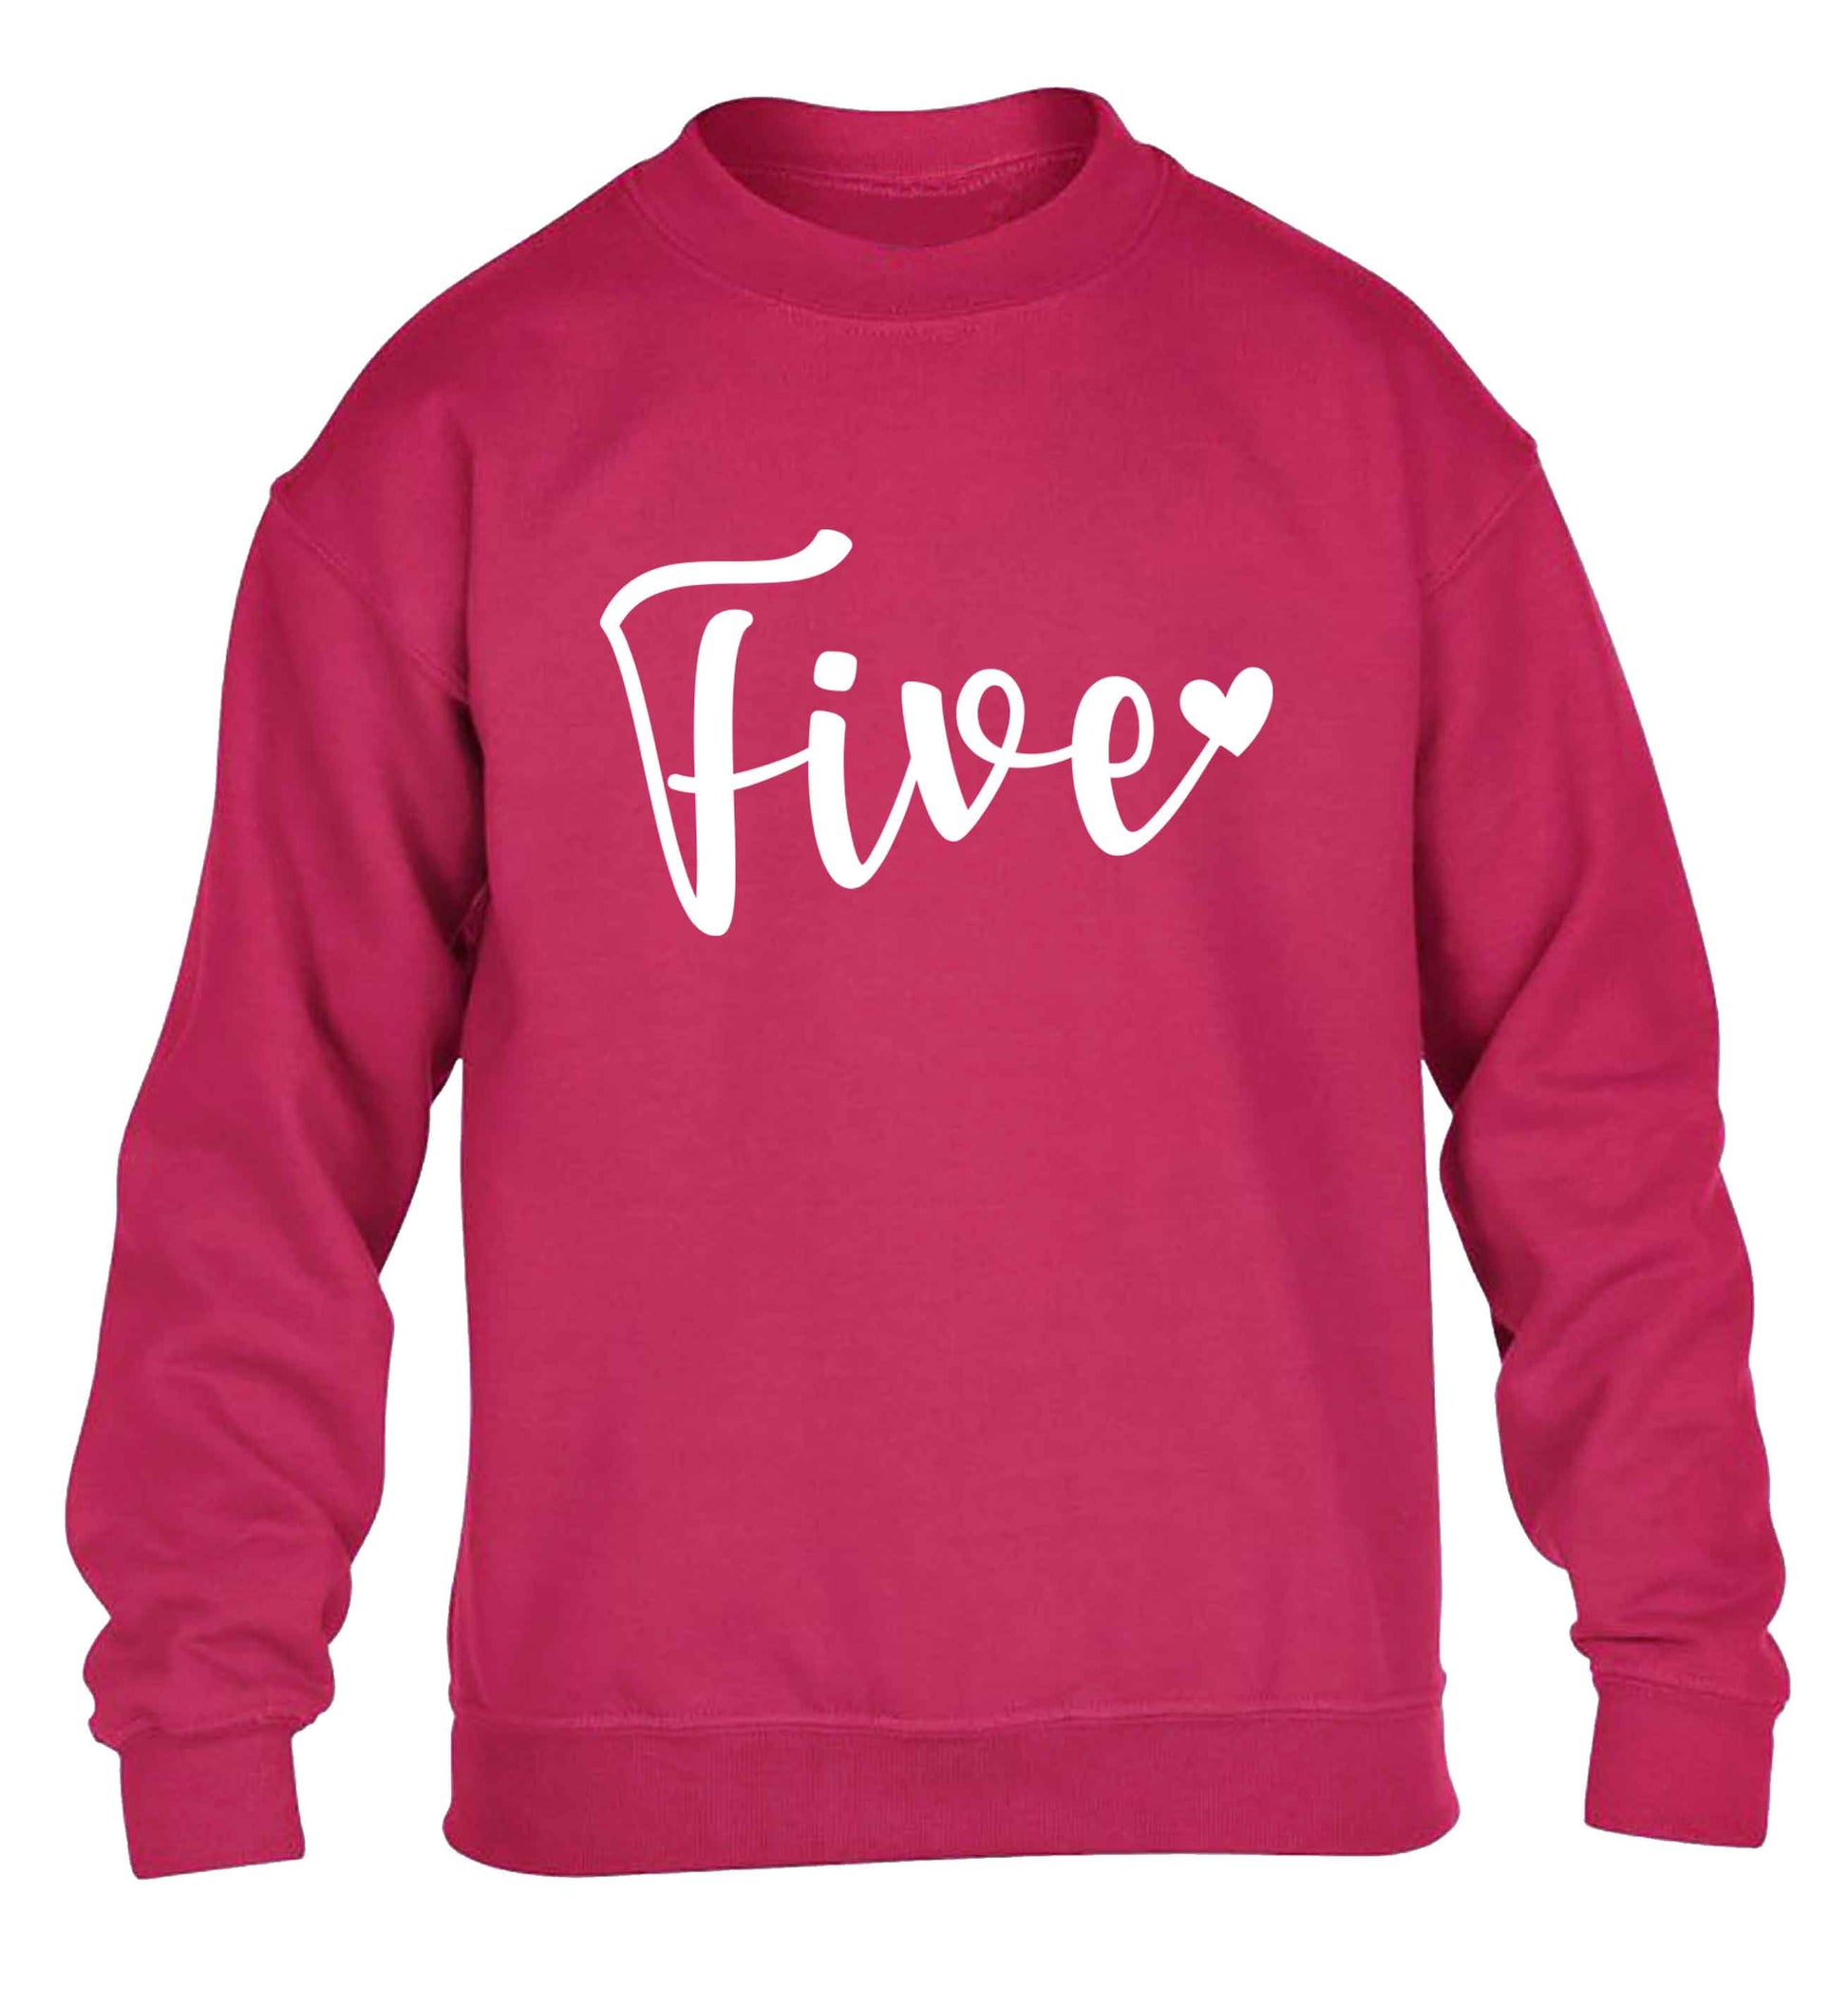 Five and heart children's pink sweater 12-13 Years